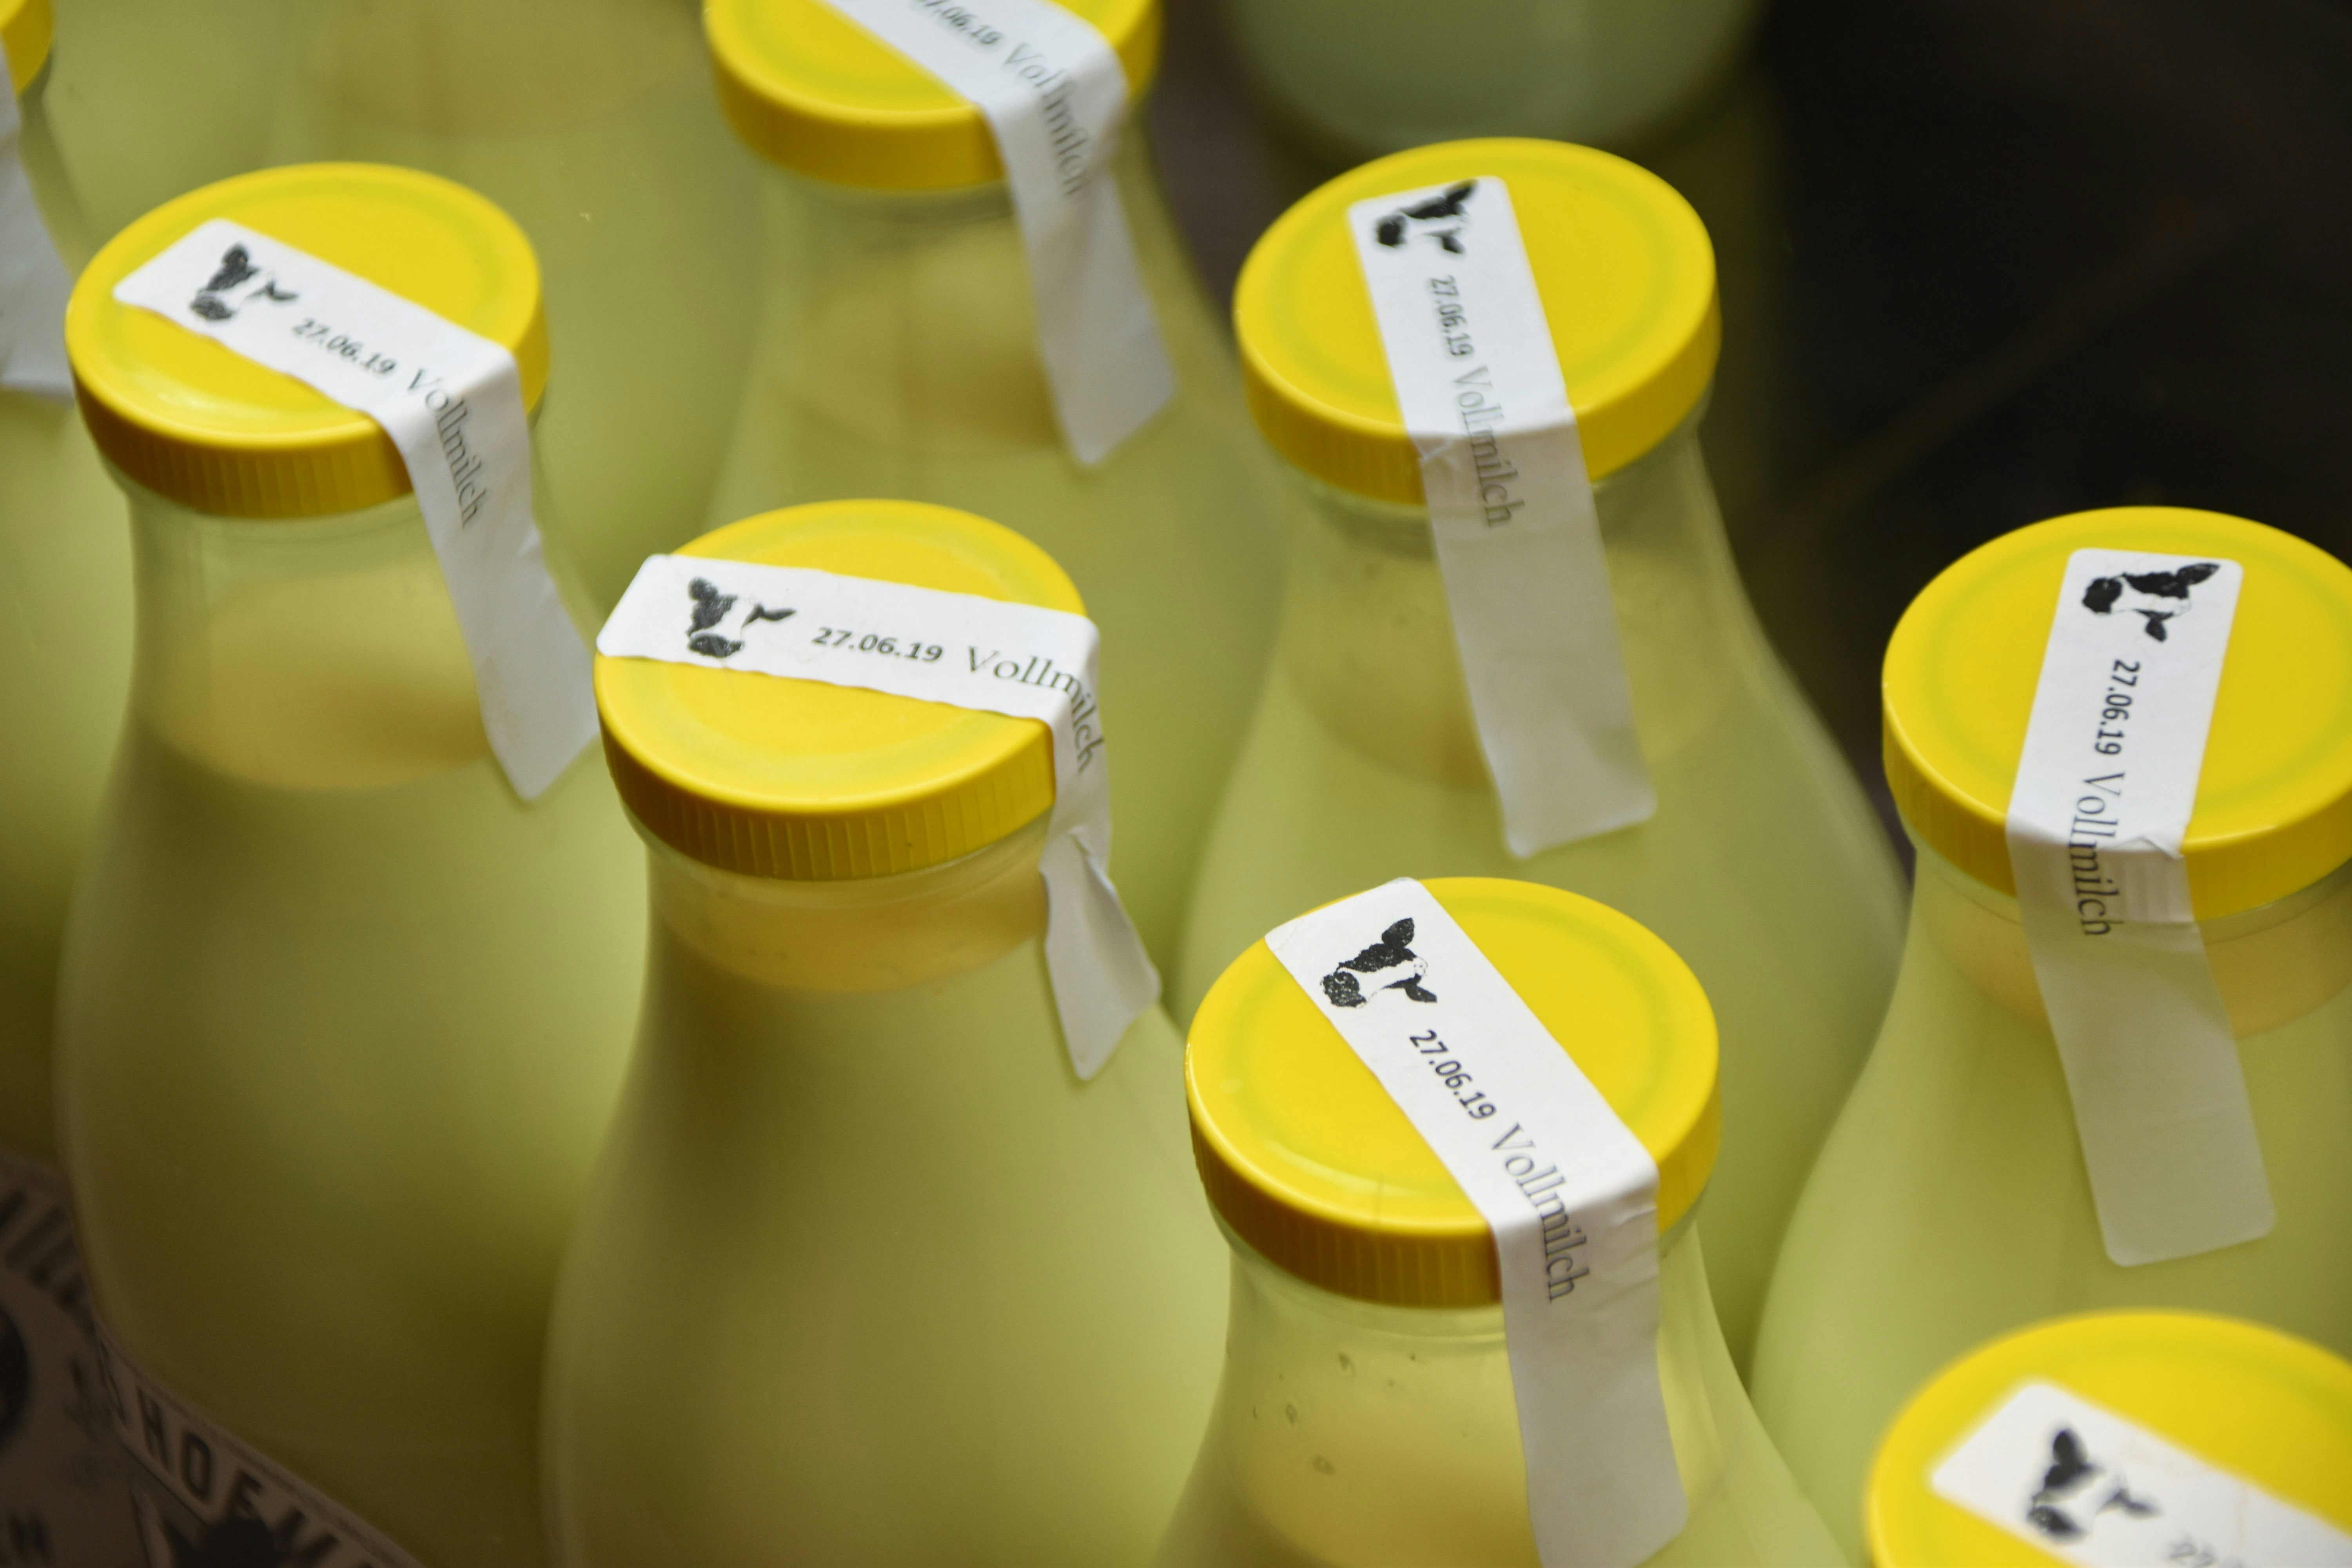 milk bottles with yellow caps sealed with white tapes